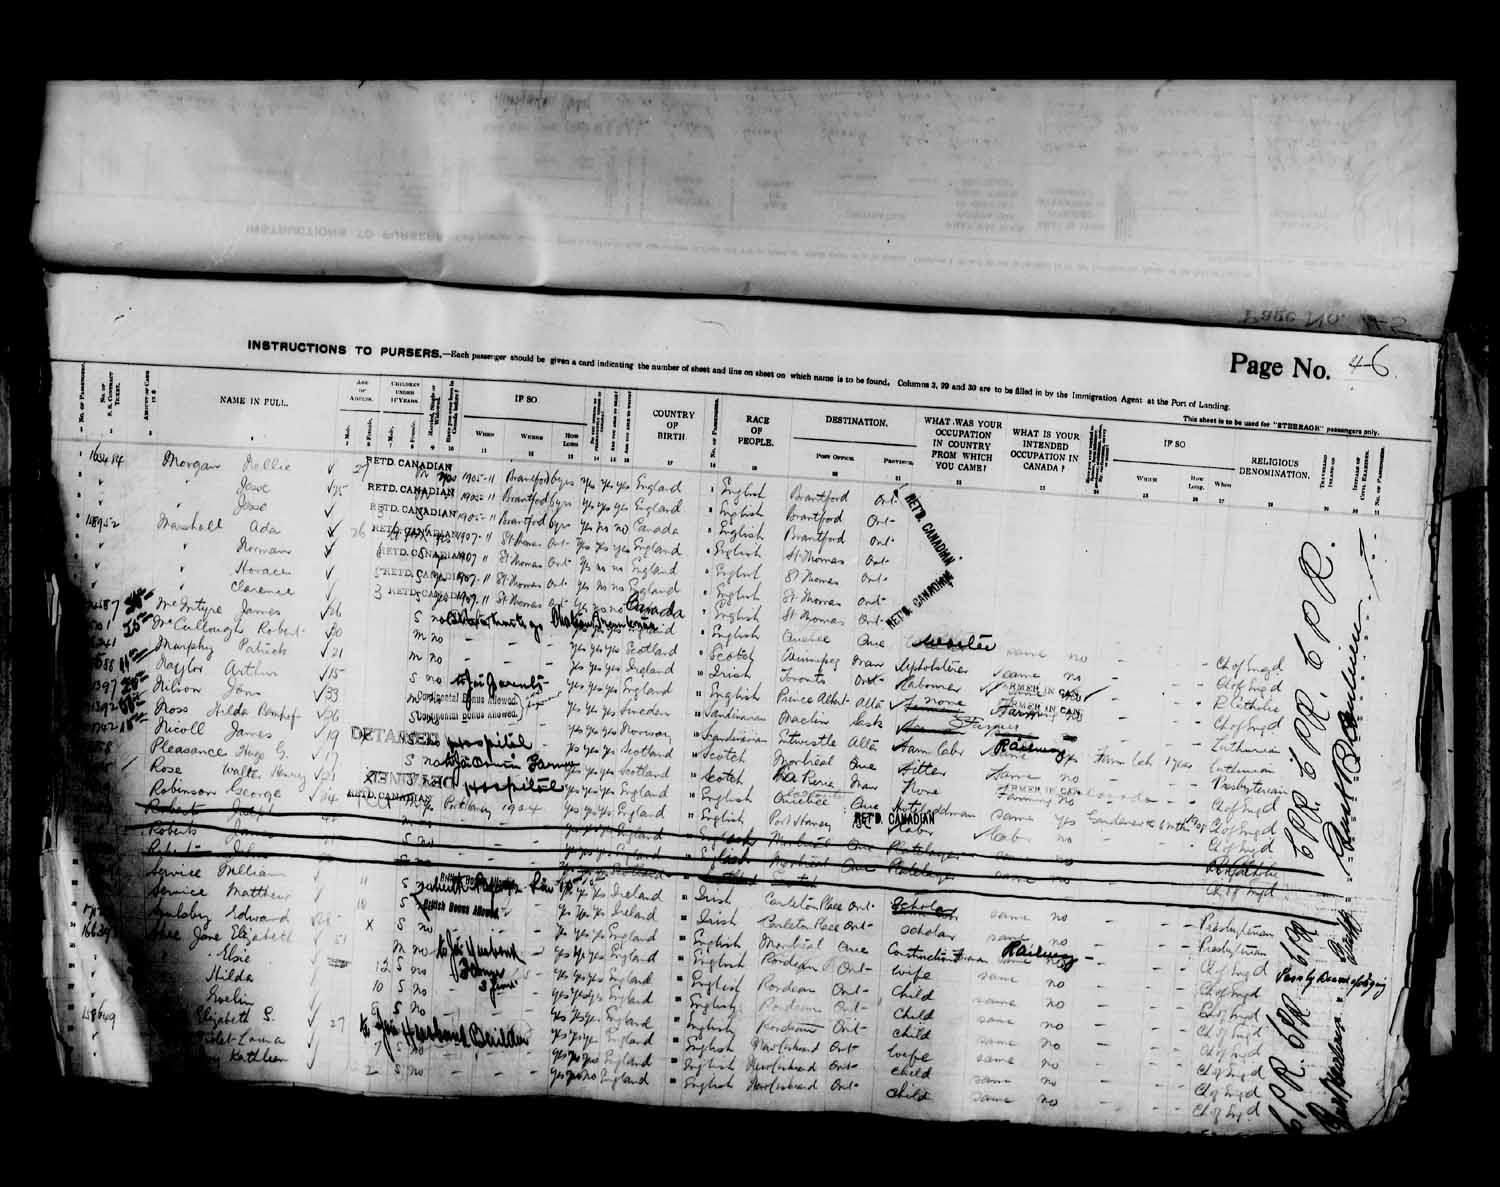 Digitized page of Quebec Passenger Lists for Image No.: e003570939